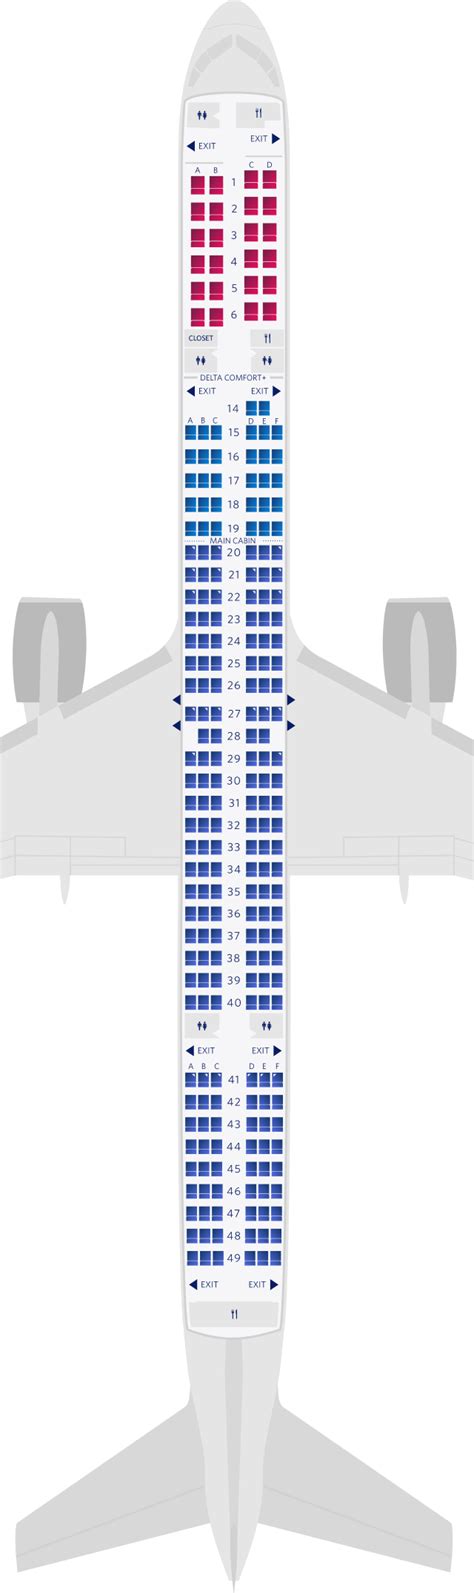 A detailed seat map showing the best airline seats on 